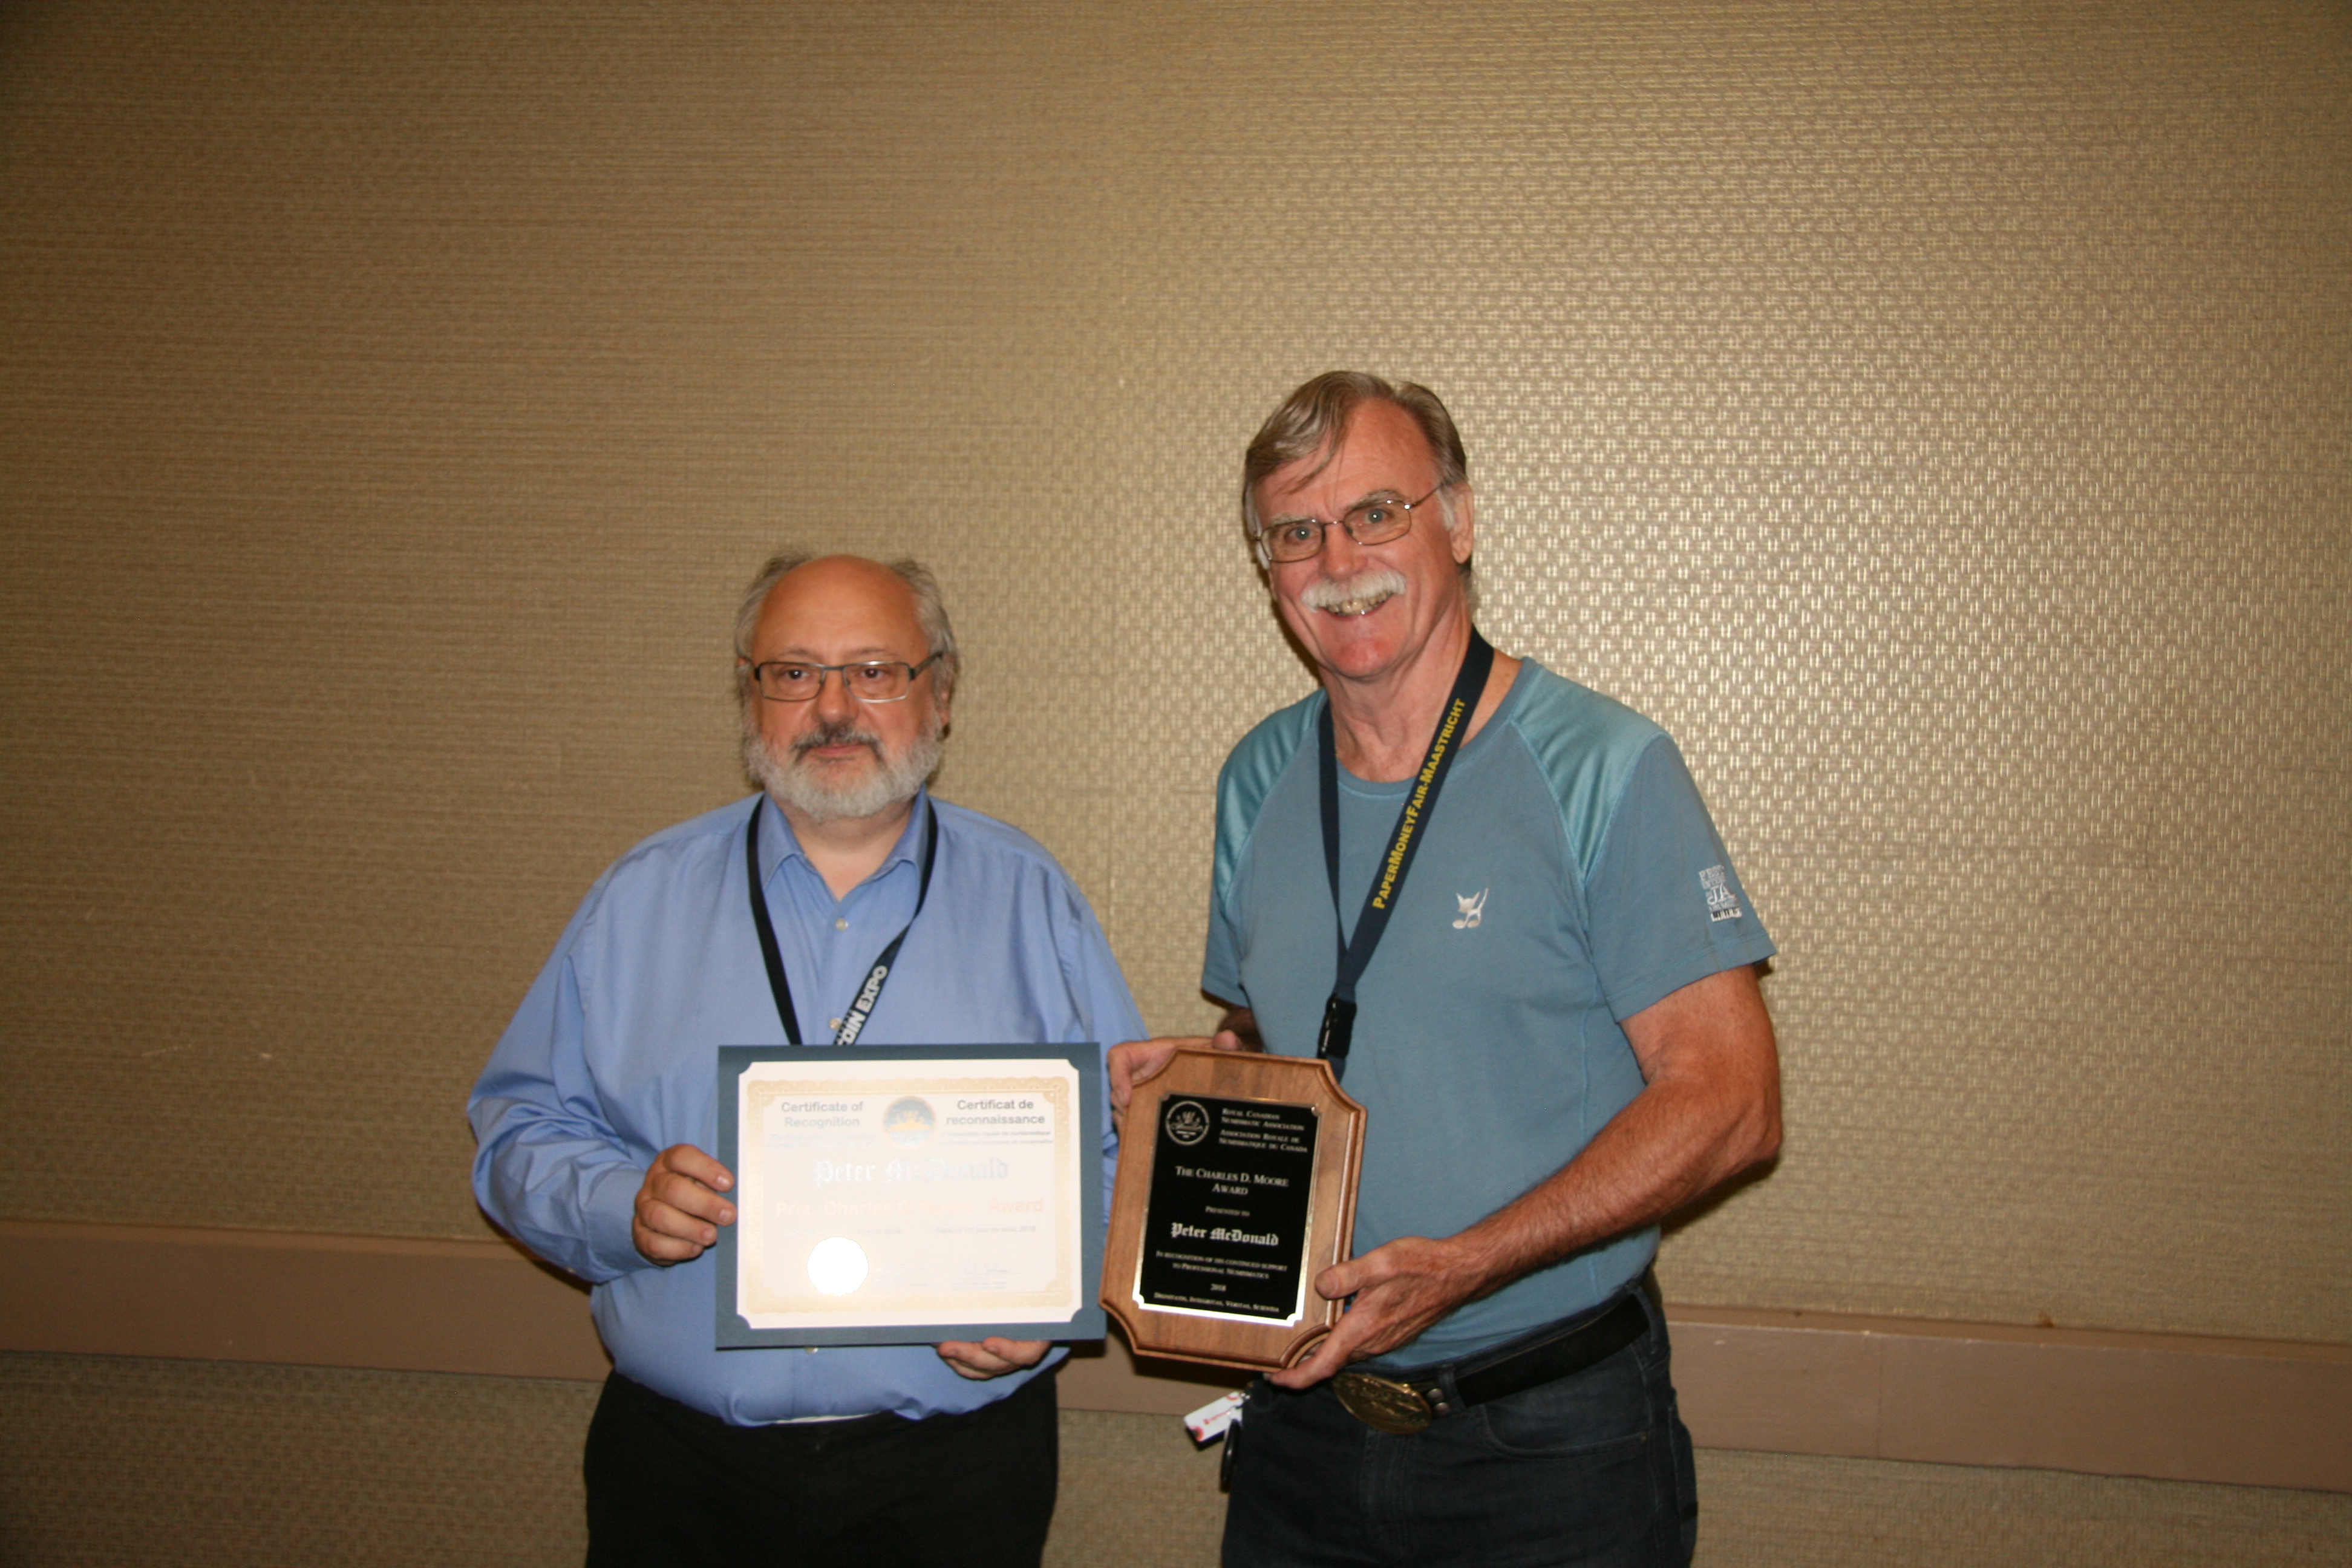 <p><strong>Peter McDonald</strong> (right) receiving the Charles D. Moore Award from <strong>Henry Nienhuis </strong>(left).<br> <small>Dan Gosling photo</small></p>